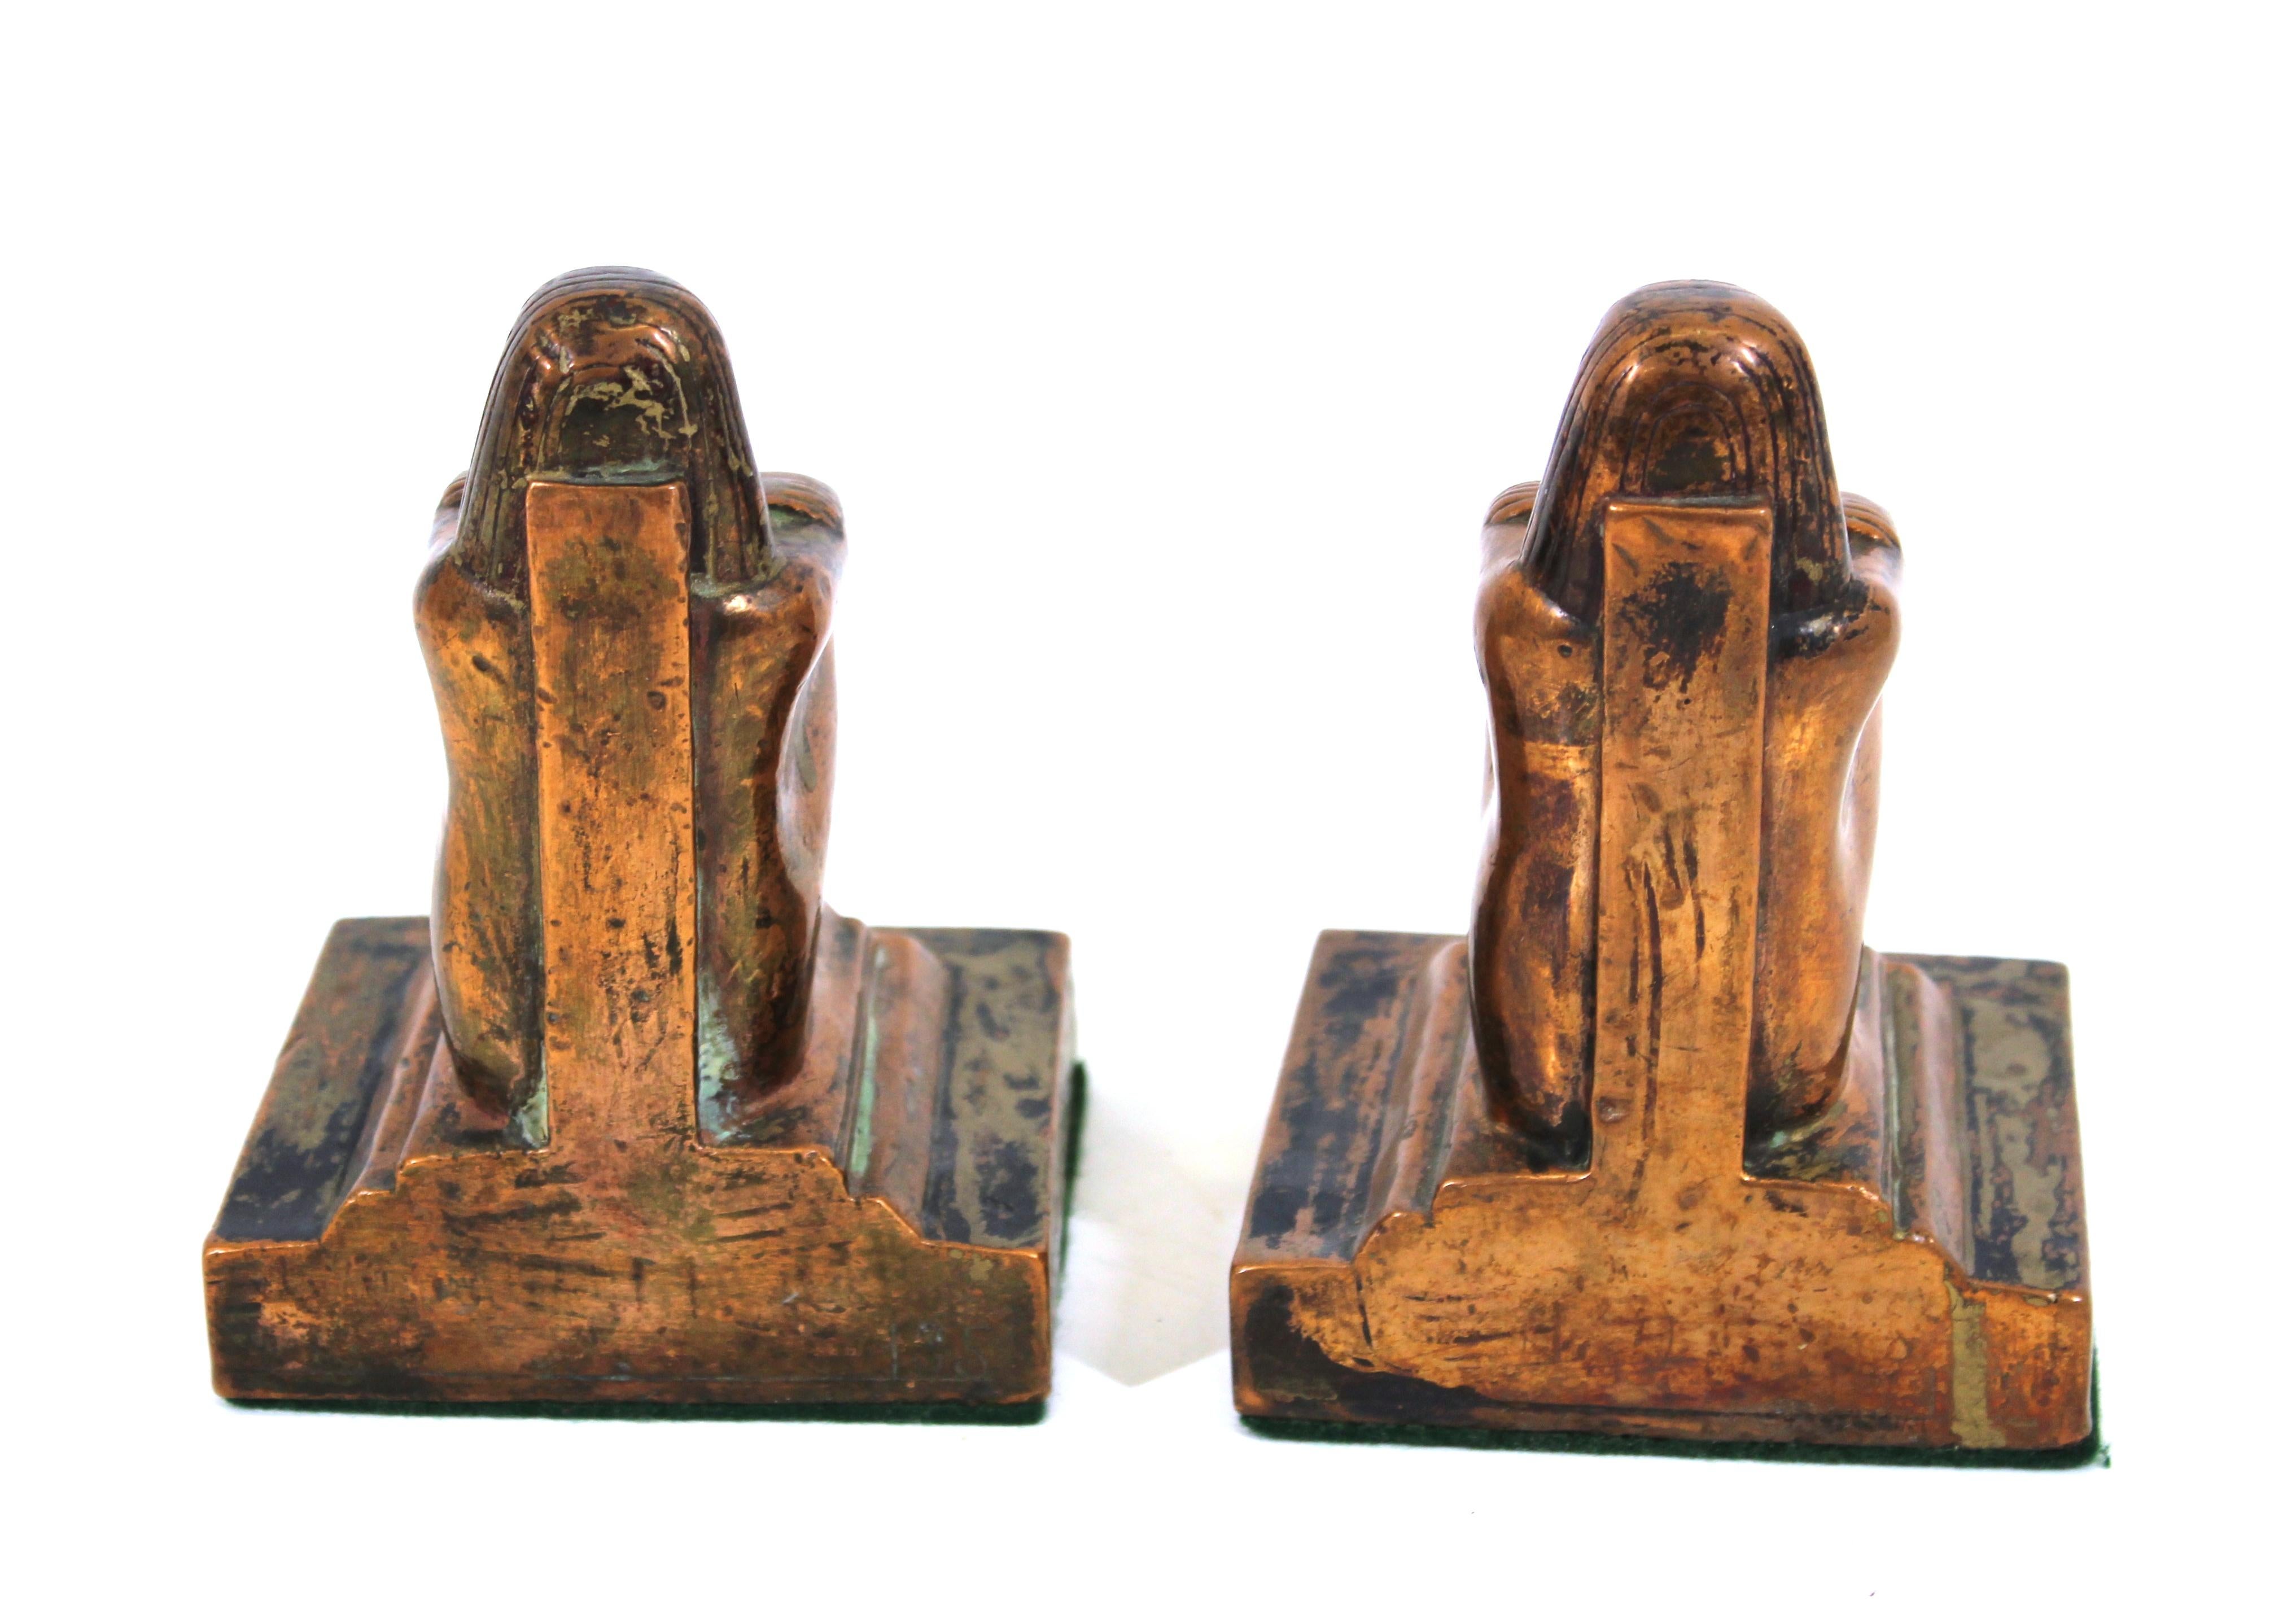 20th Century Egyptian Revival Style Figurative Brass Bookends For Sale